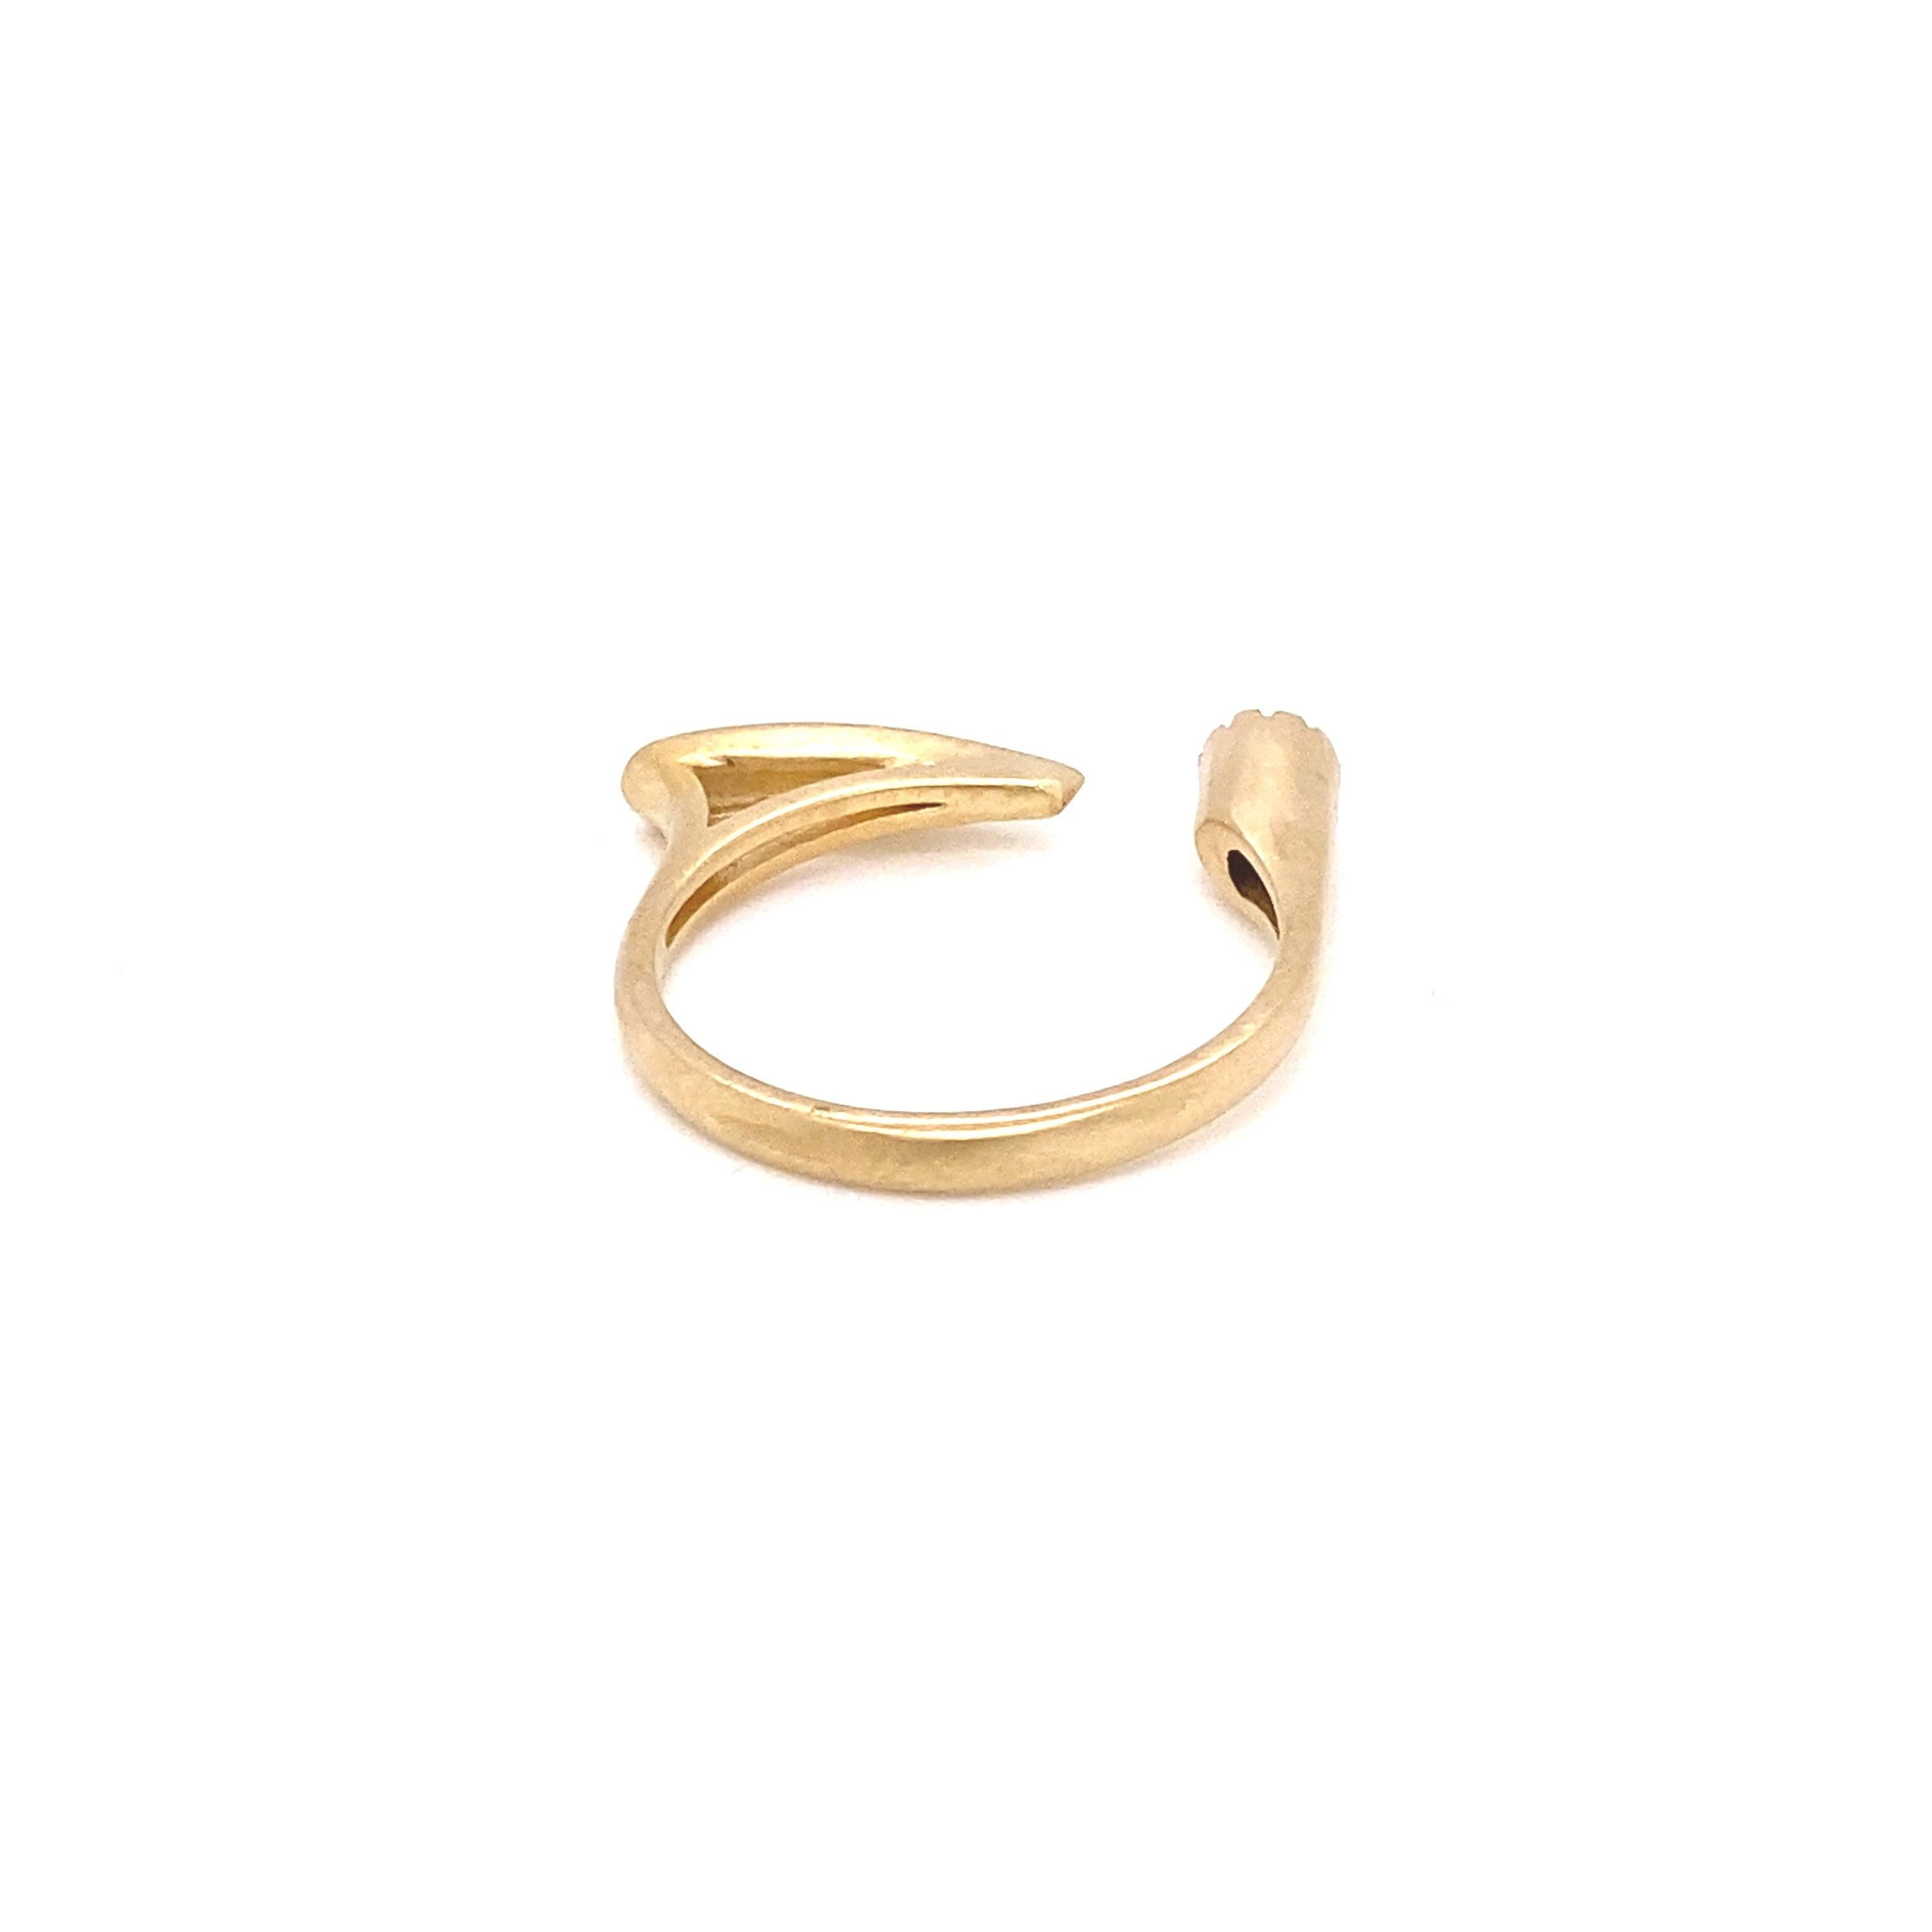 For Sale:  Handcrafted 14 Karat Yellow Gold Gap Ring 3